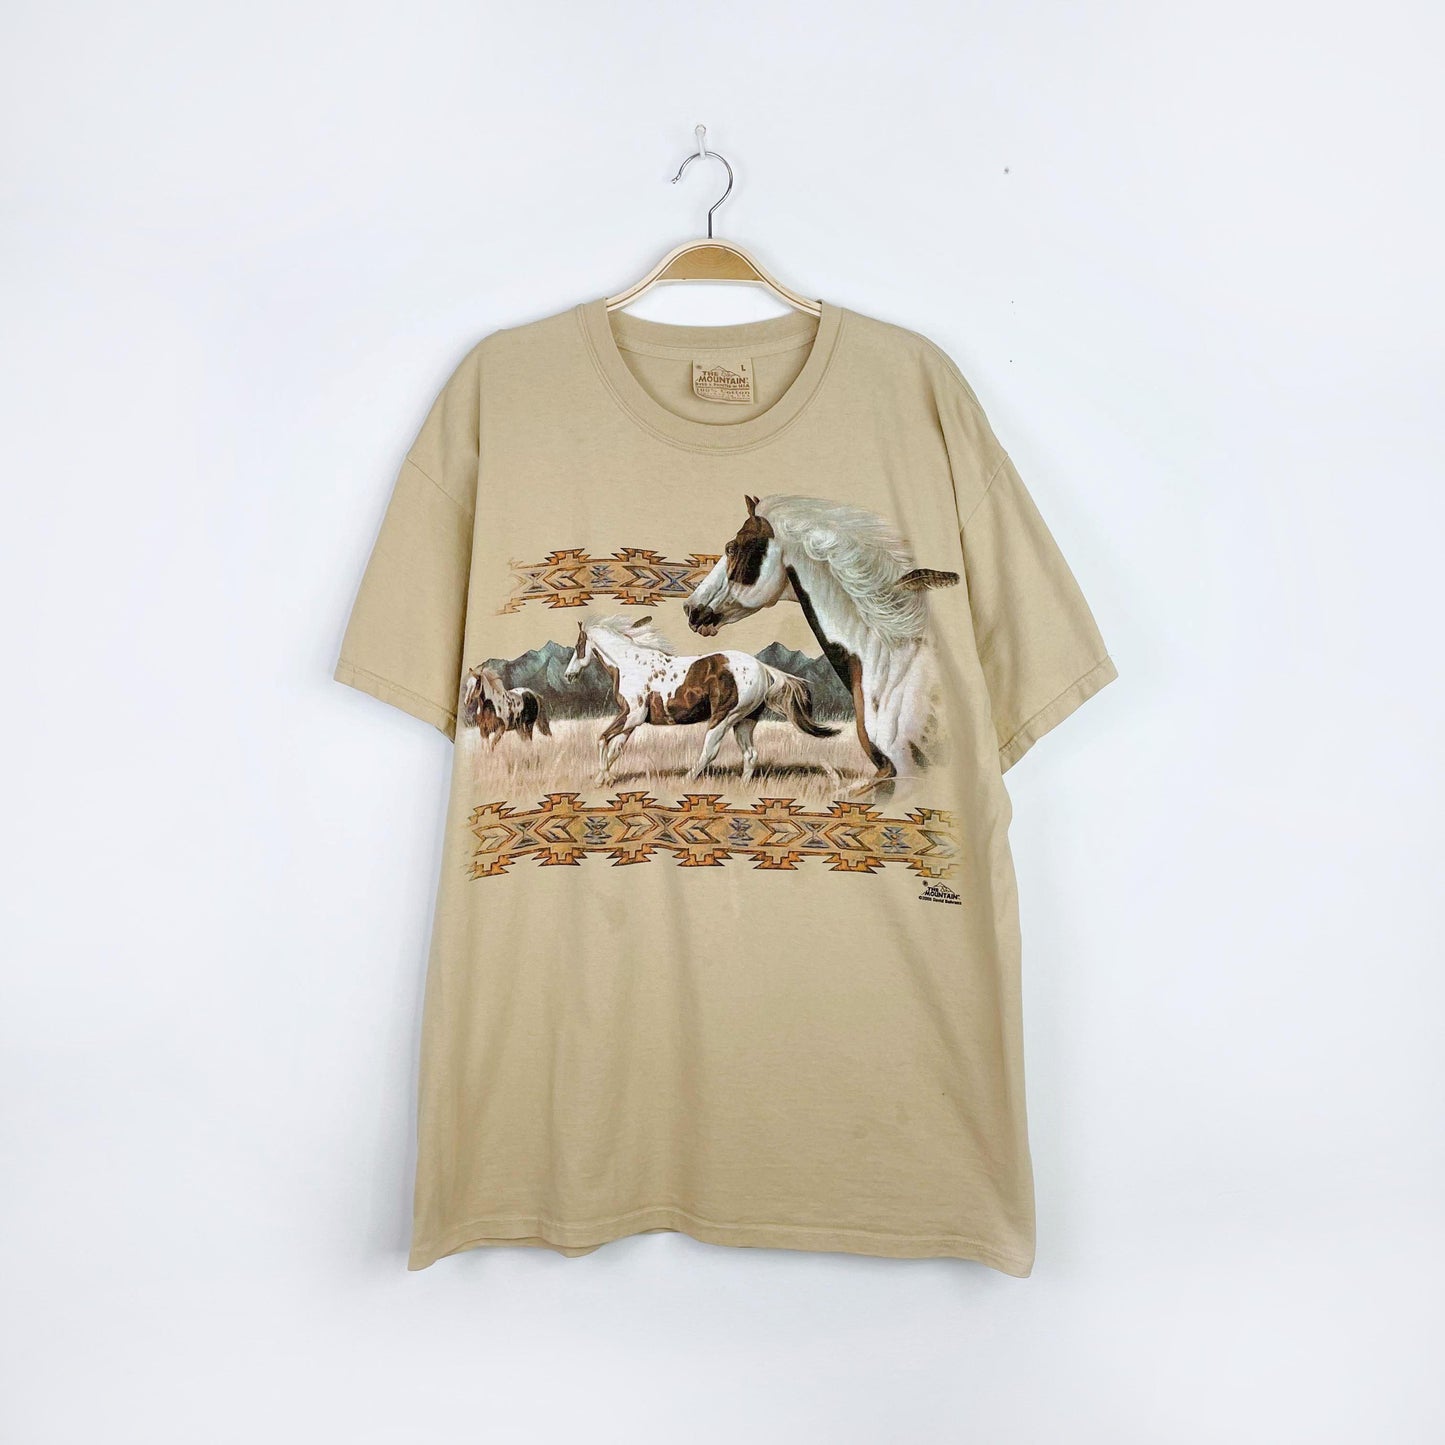 vintage 00s the mountain wild horses graphic tee - size large